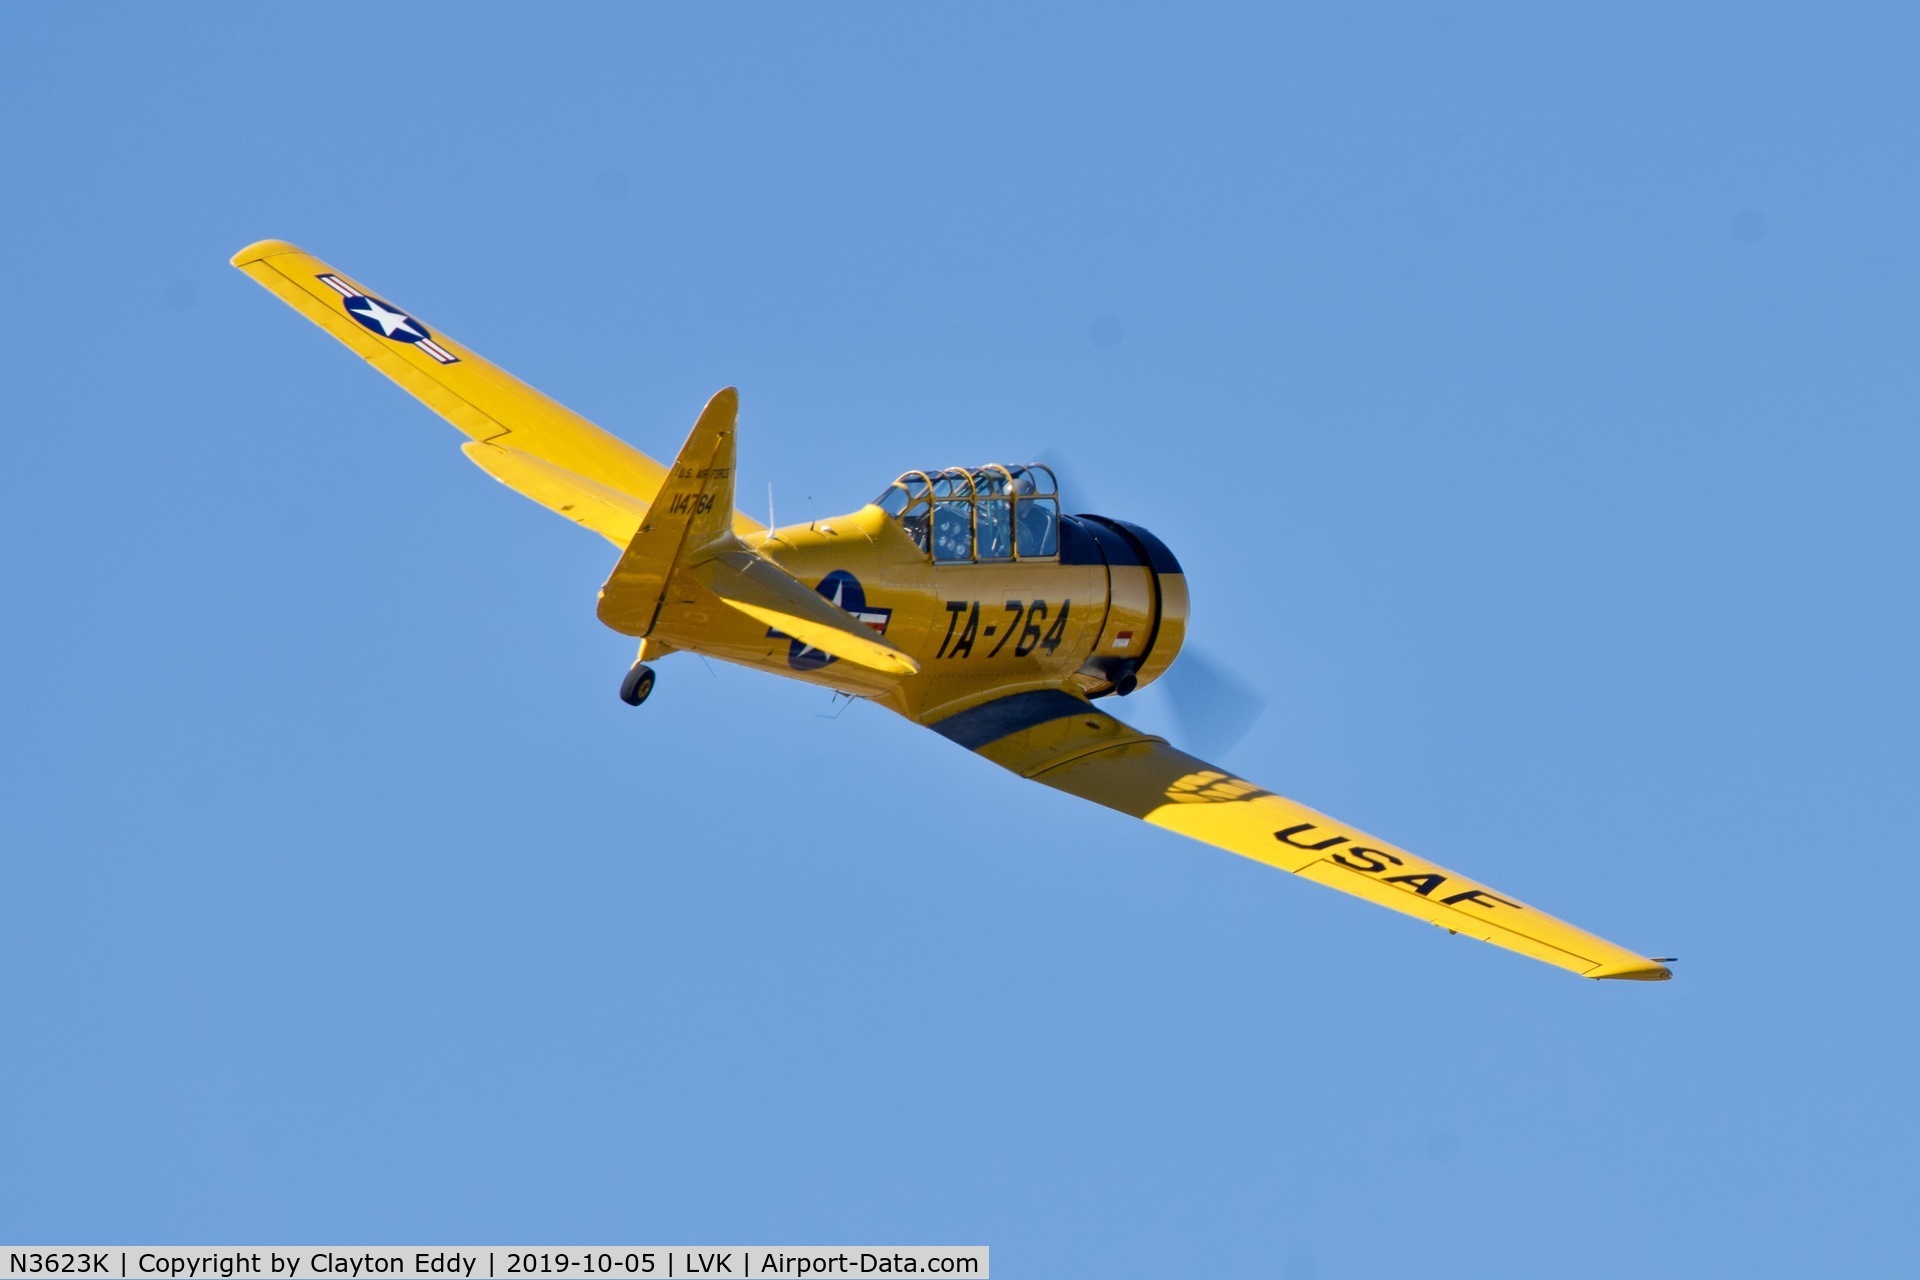 N3623K, North American T-6G Texan C/N 168-472, Livermore airport airshow 2019.